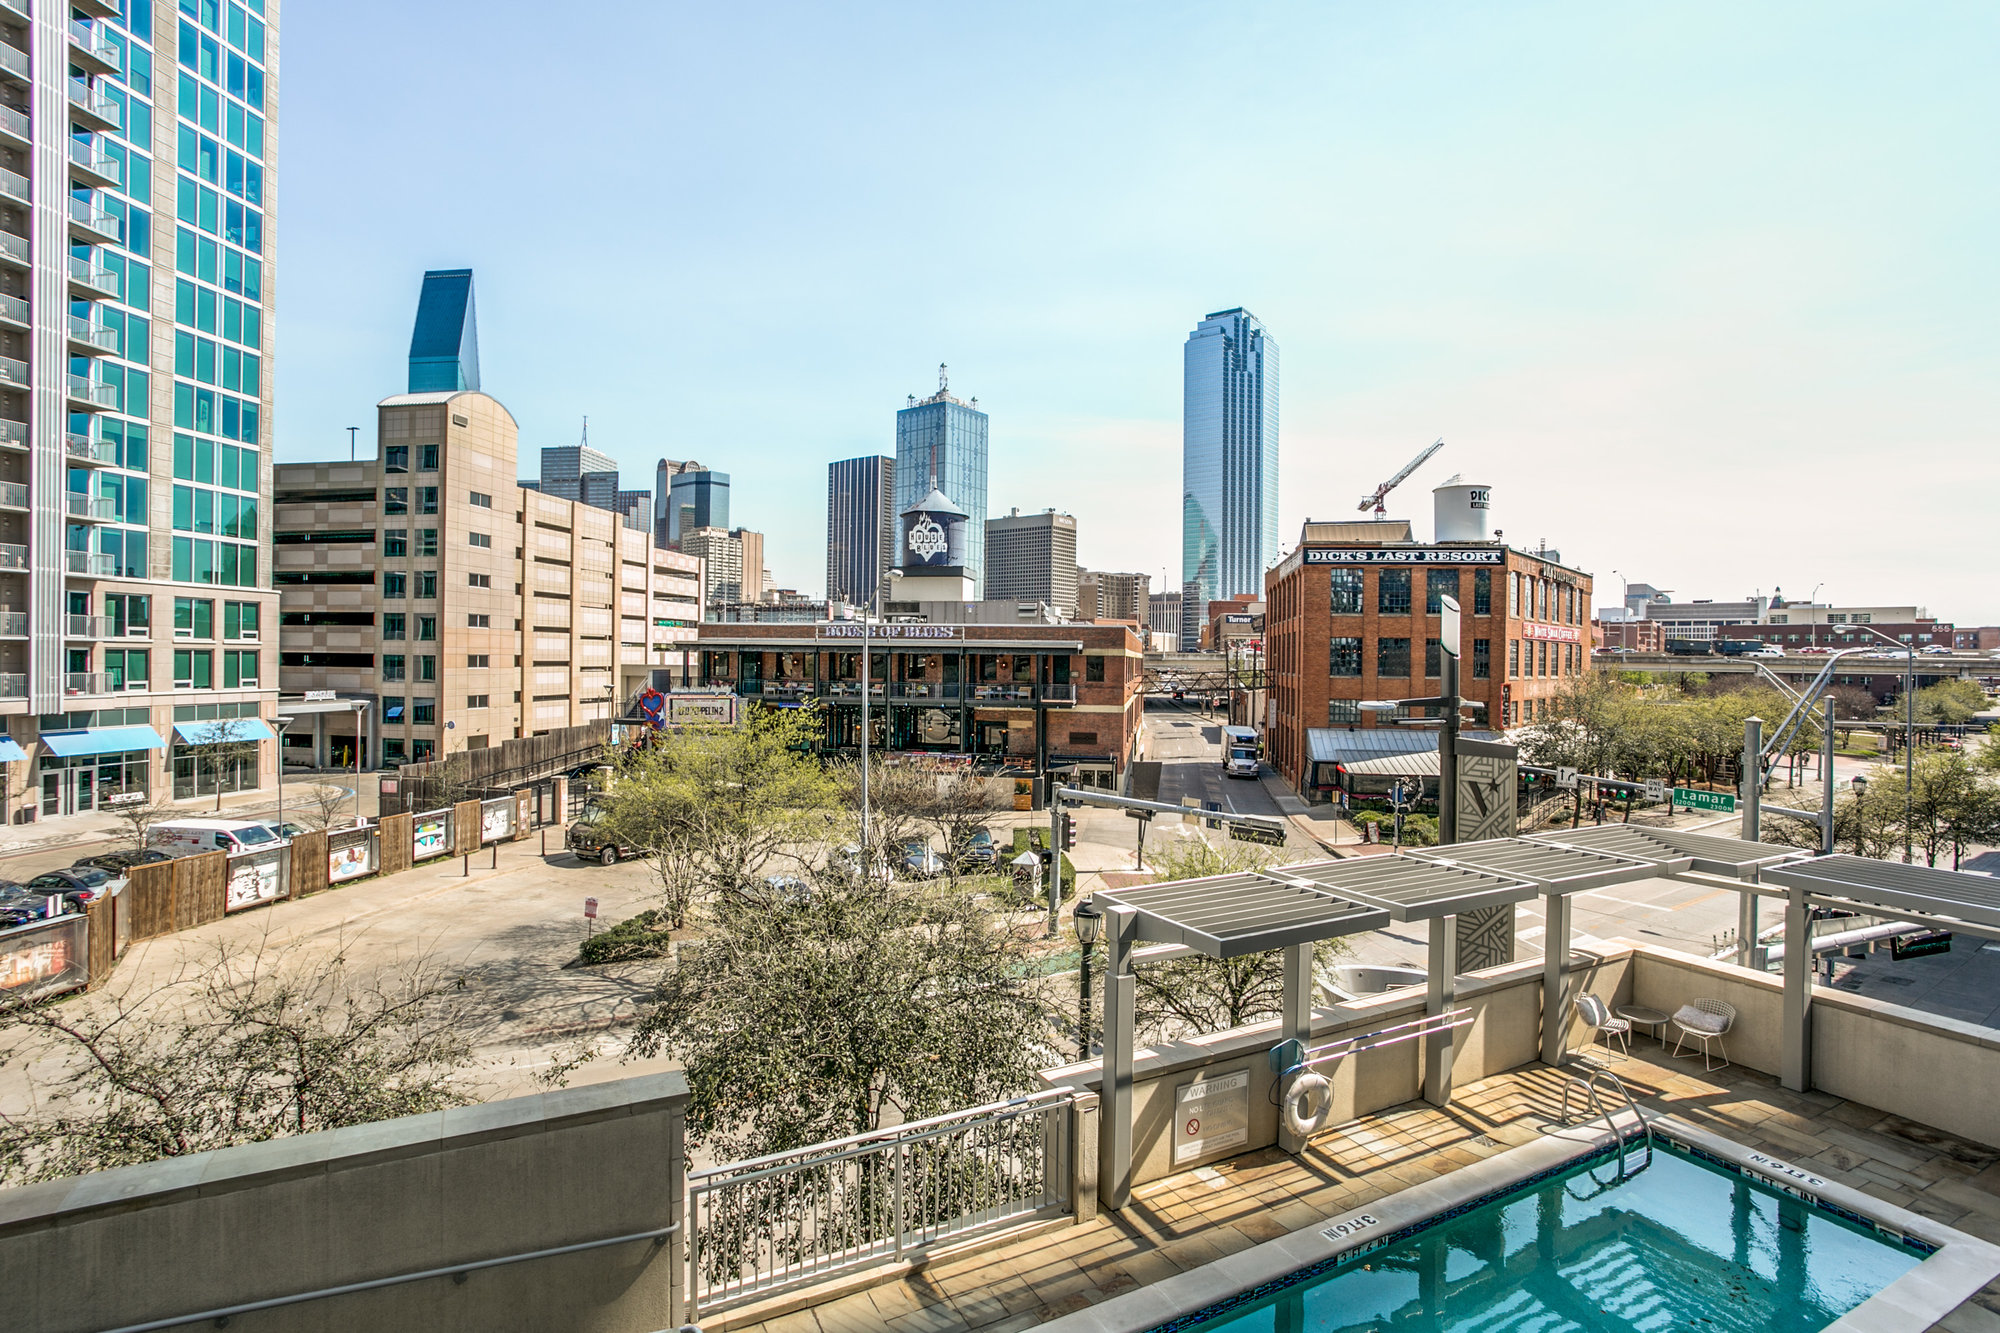 West End Dallas Real Estate, Homes, Condos & Lofts For Sale or Rent